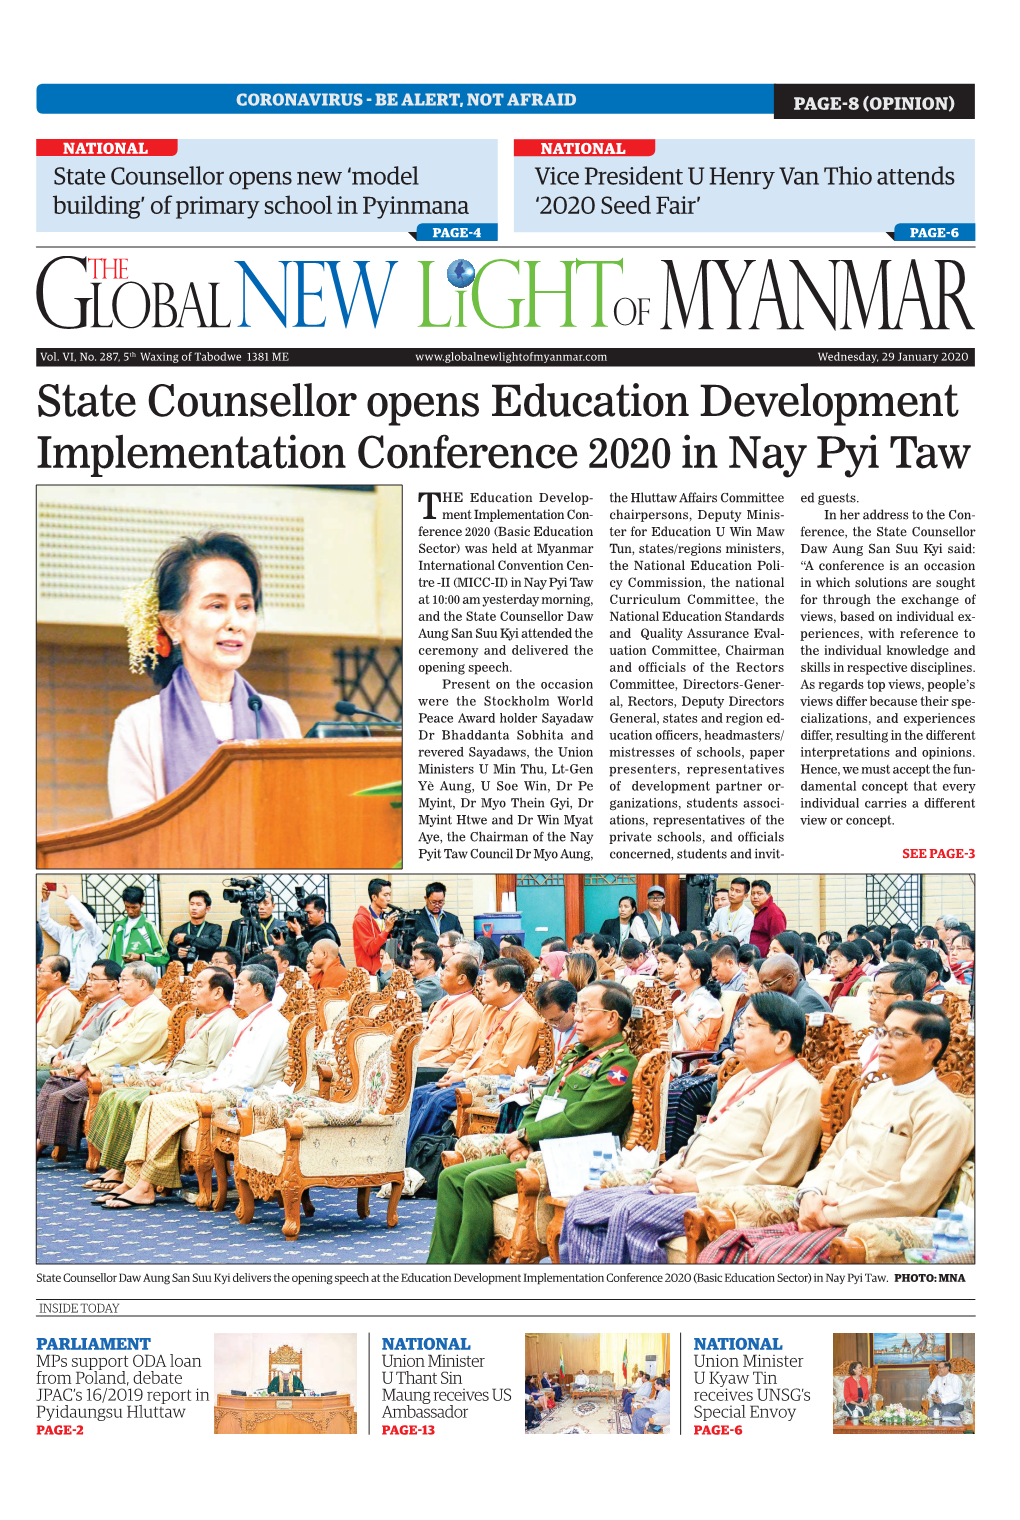 State Counsellor Opens Education Development Implementation Conference 2020 in Nay Pyi Taw